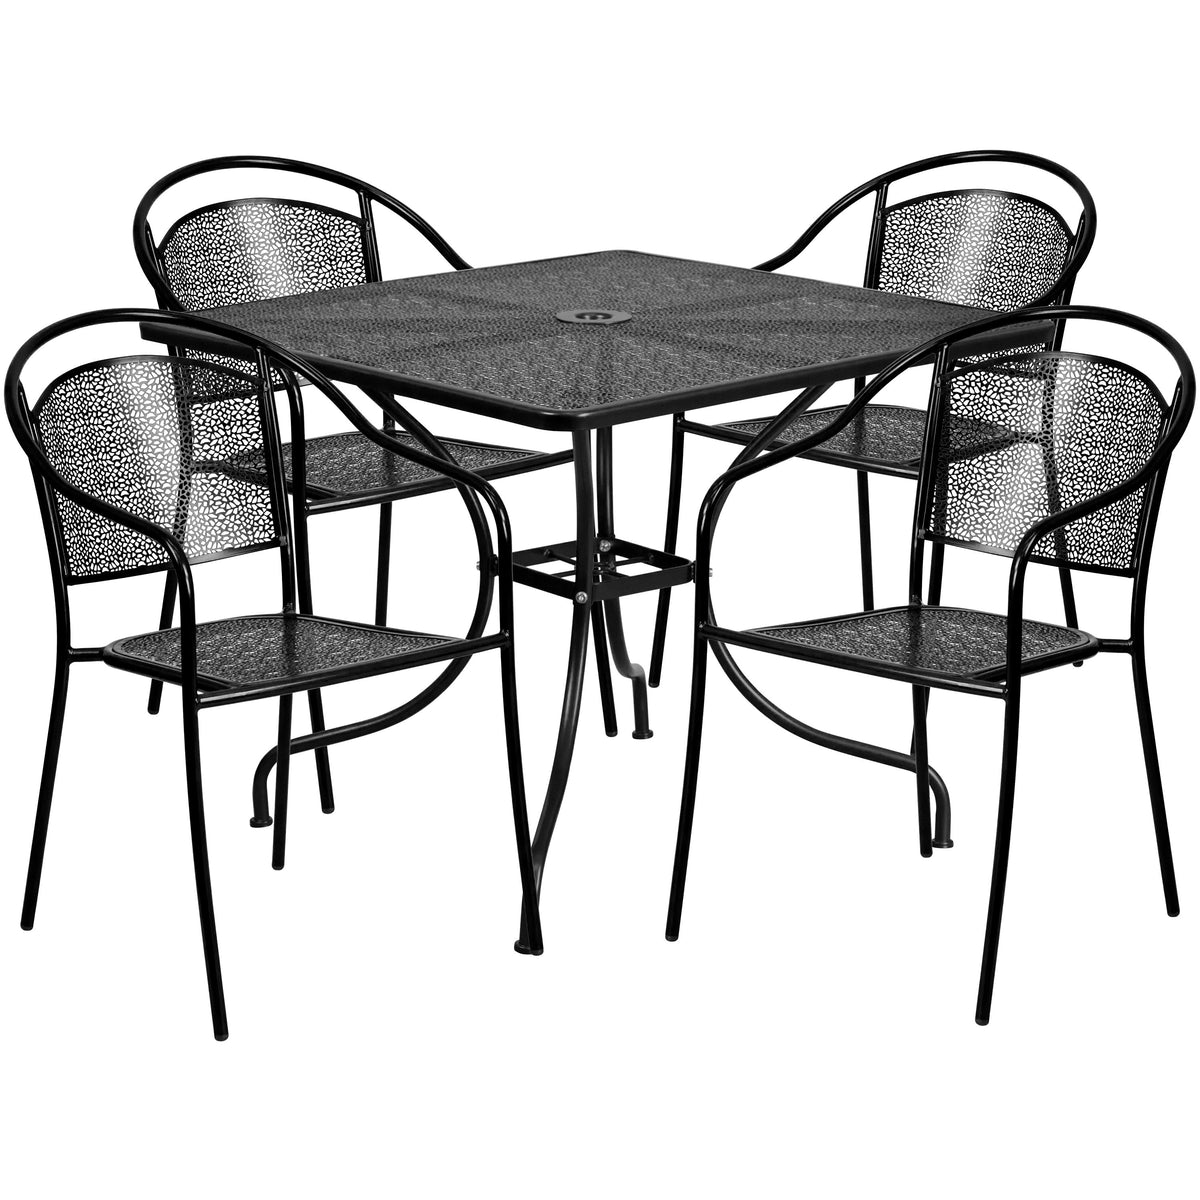 Black |#| 35.5inch Square Black Indoor-Outdoor Steel Patio Table Set w/ 4 Round Back Chairs